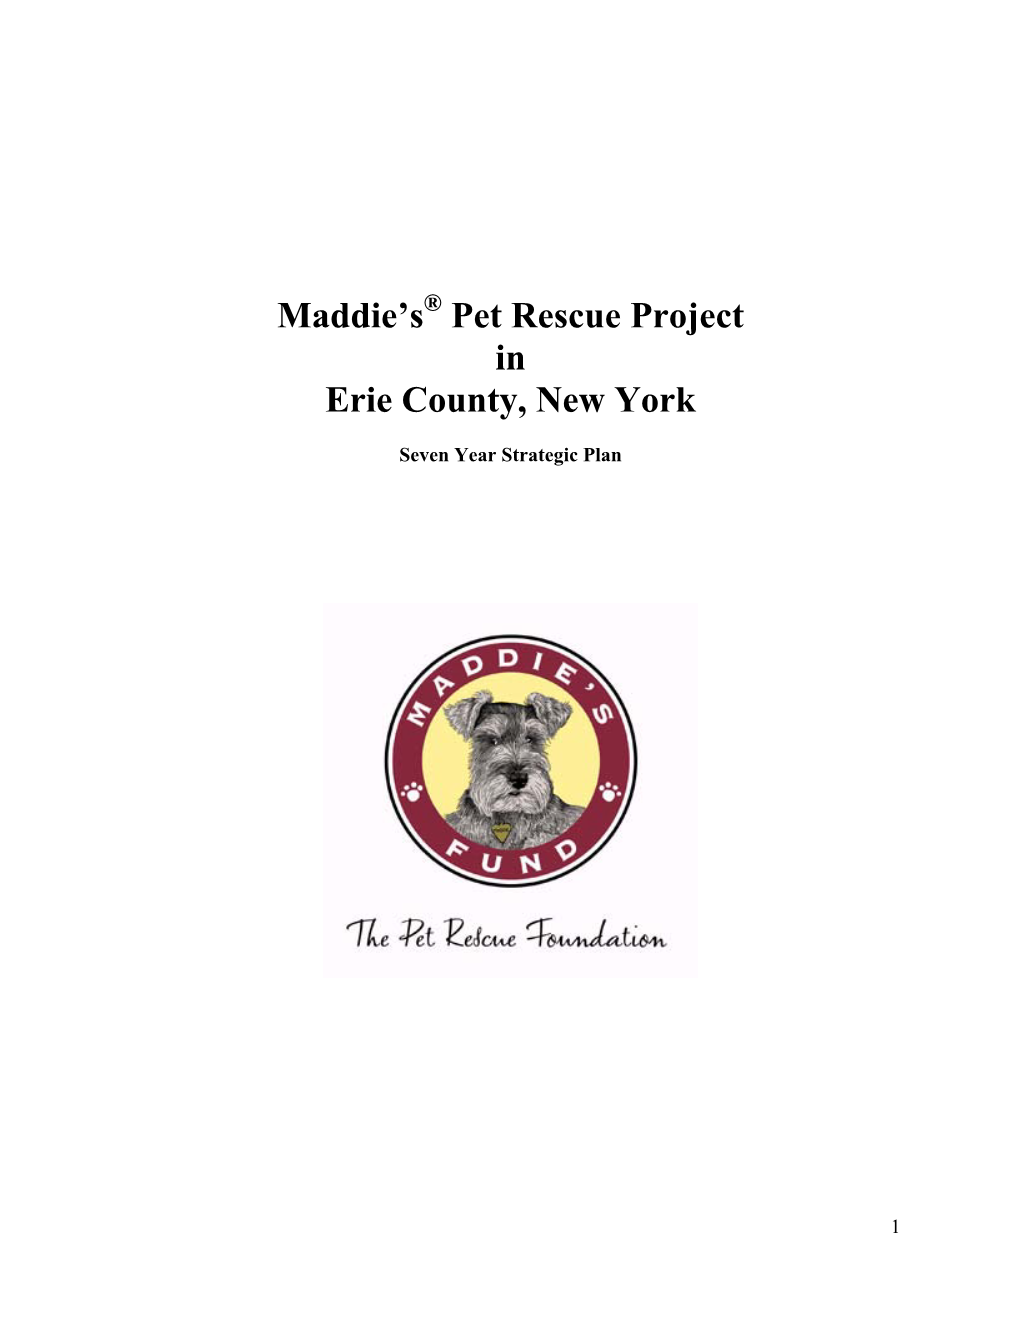 Maddie's Pet Rescue Project